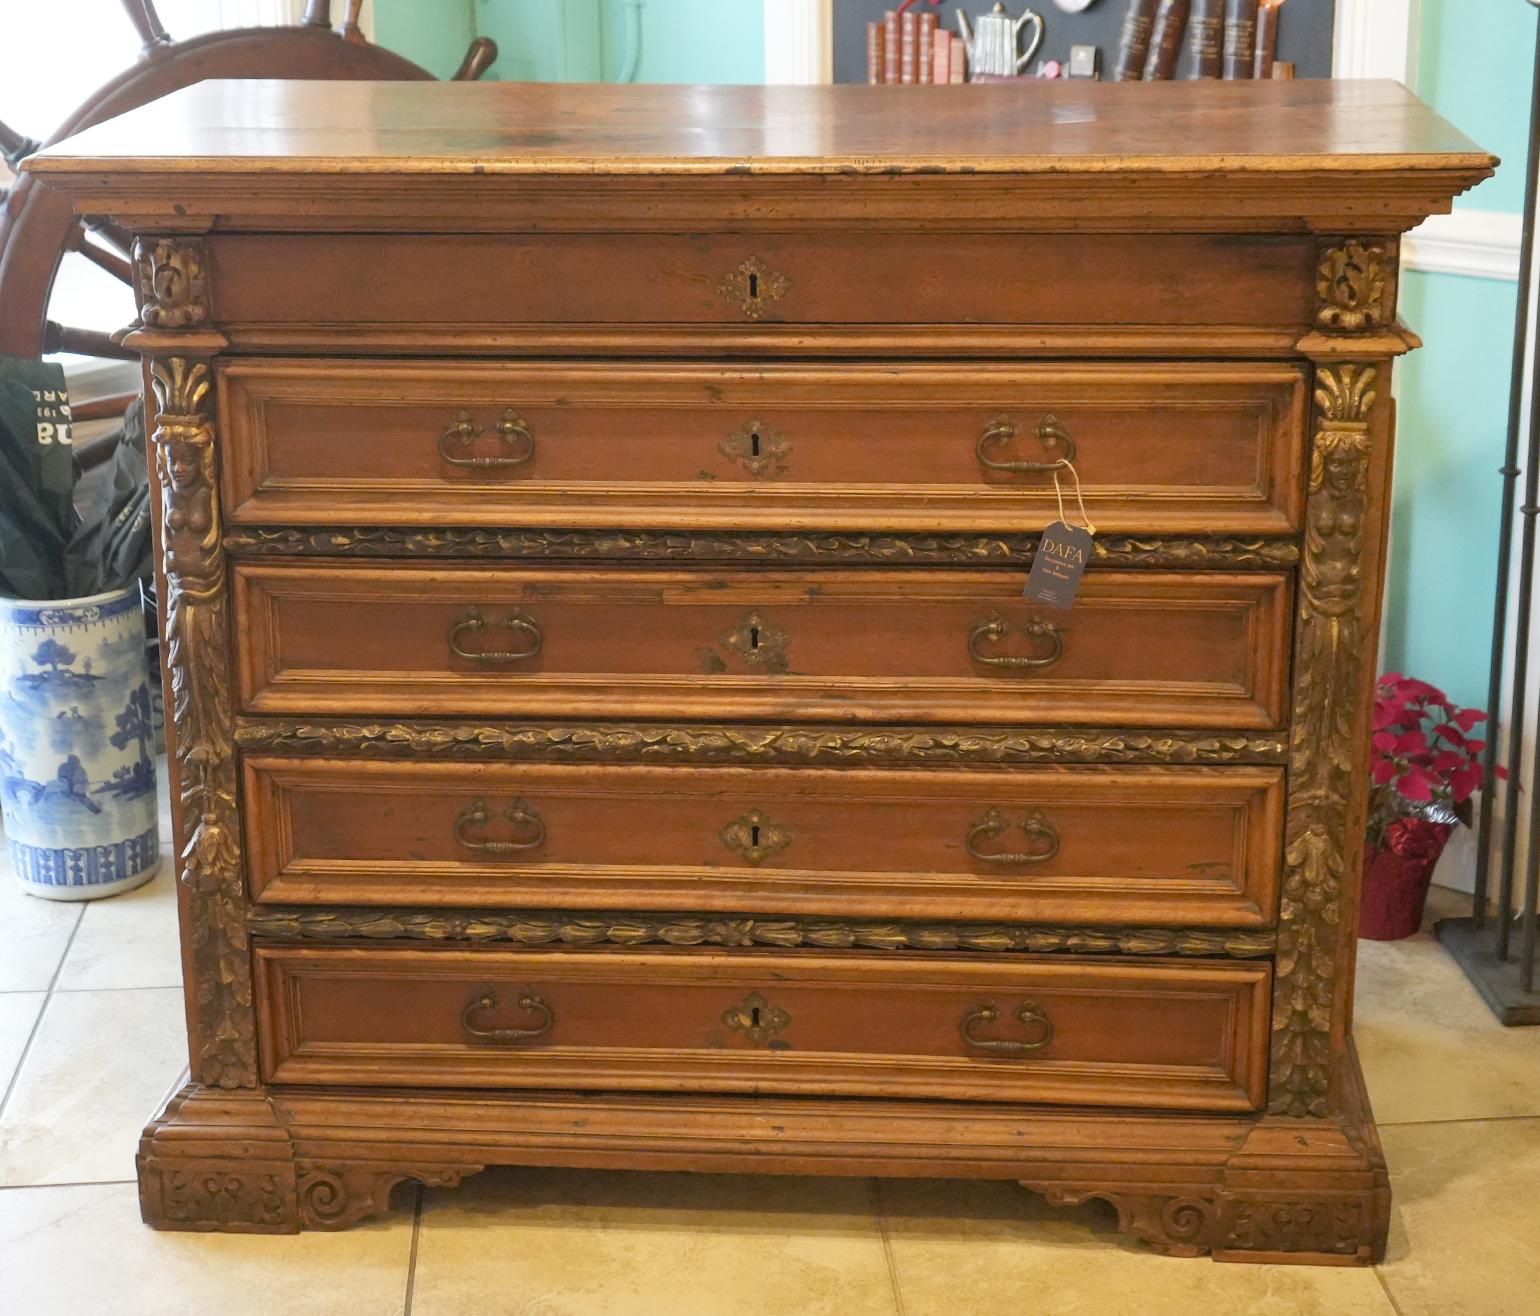 Large 18th Ct. Walnut Italian Chest of Drawers. Wonderful original condition. Walnut with nicely detailed carved sides and in-between drawers. 5 drawers.